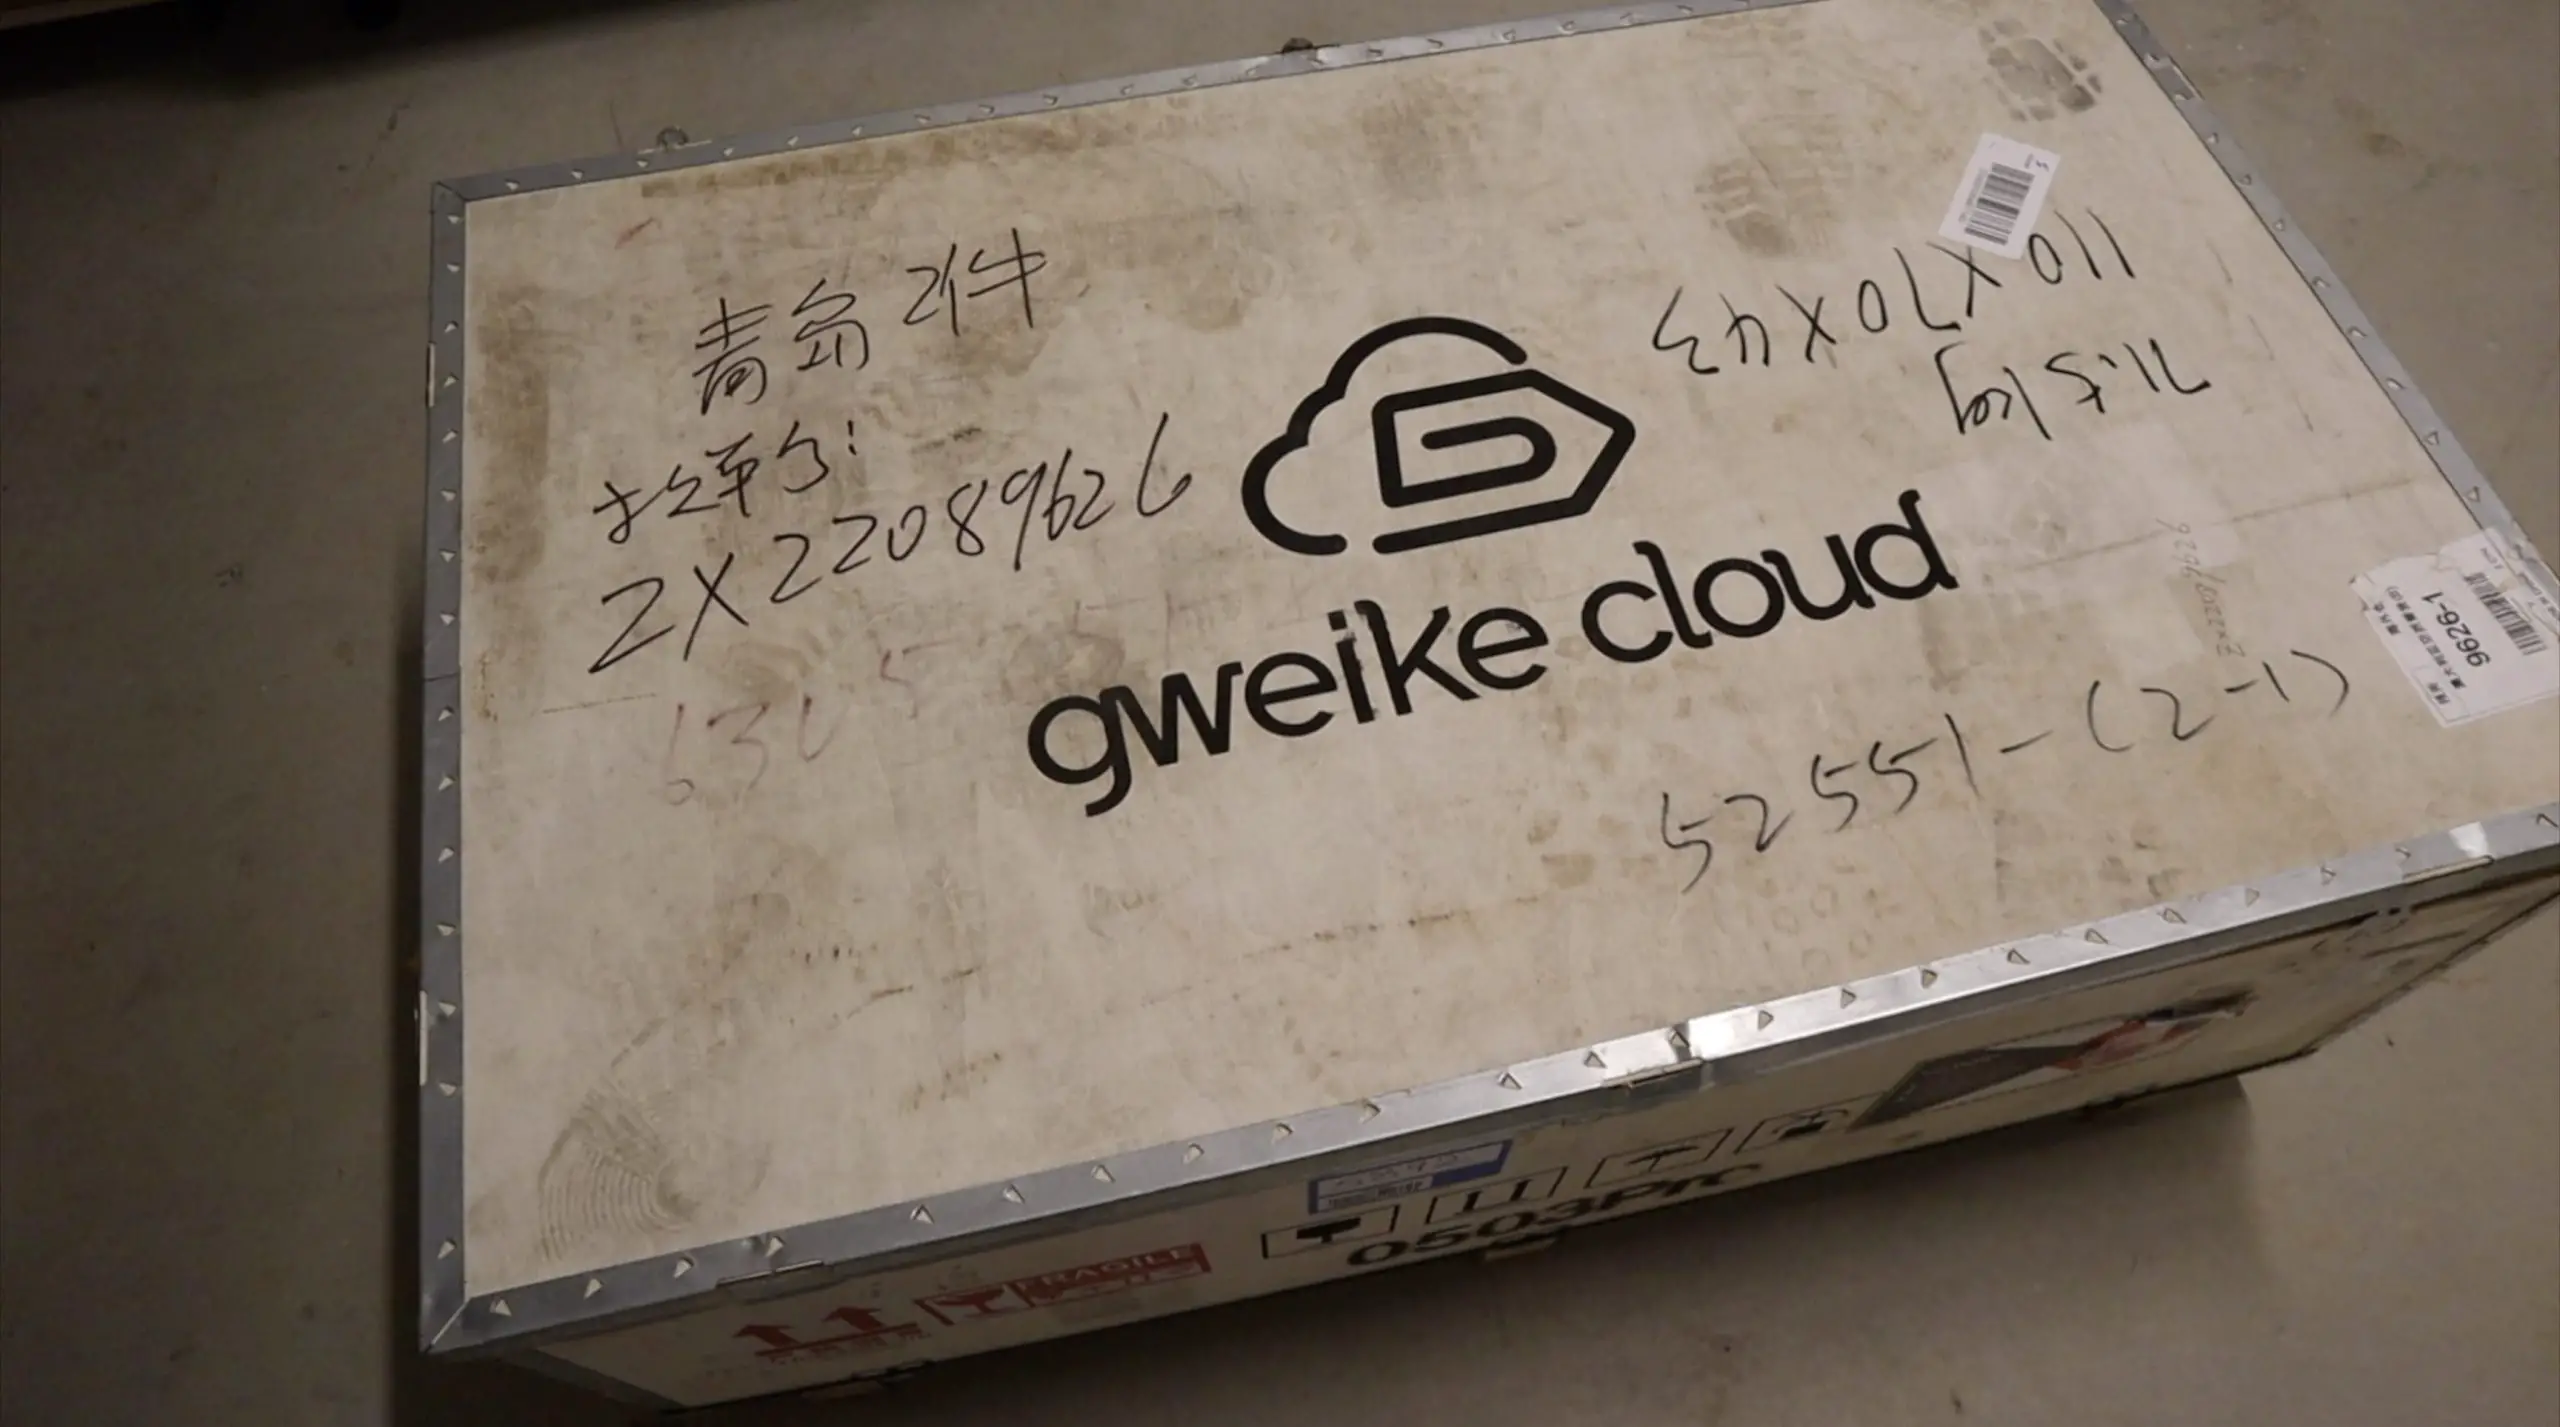 Gweike Cloud Crate For Delivery